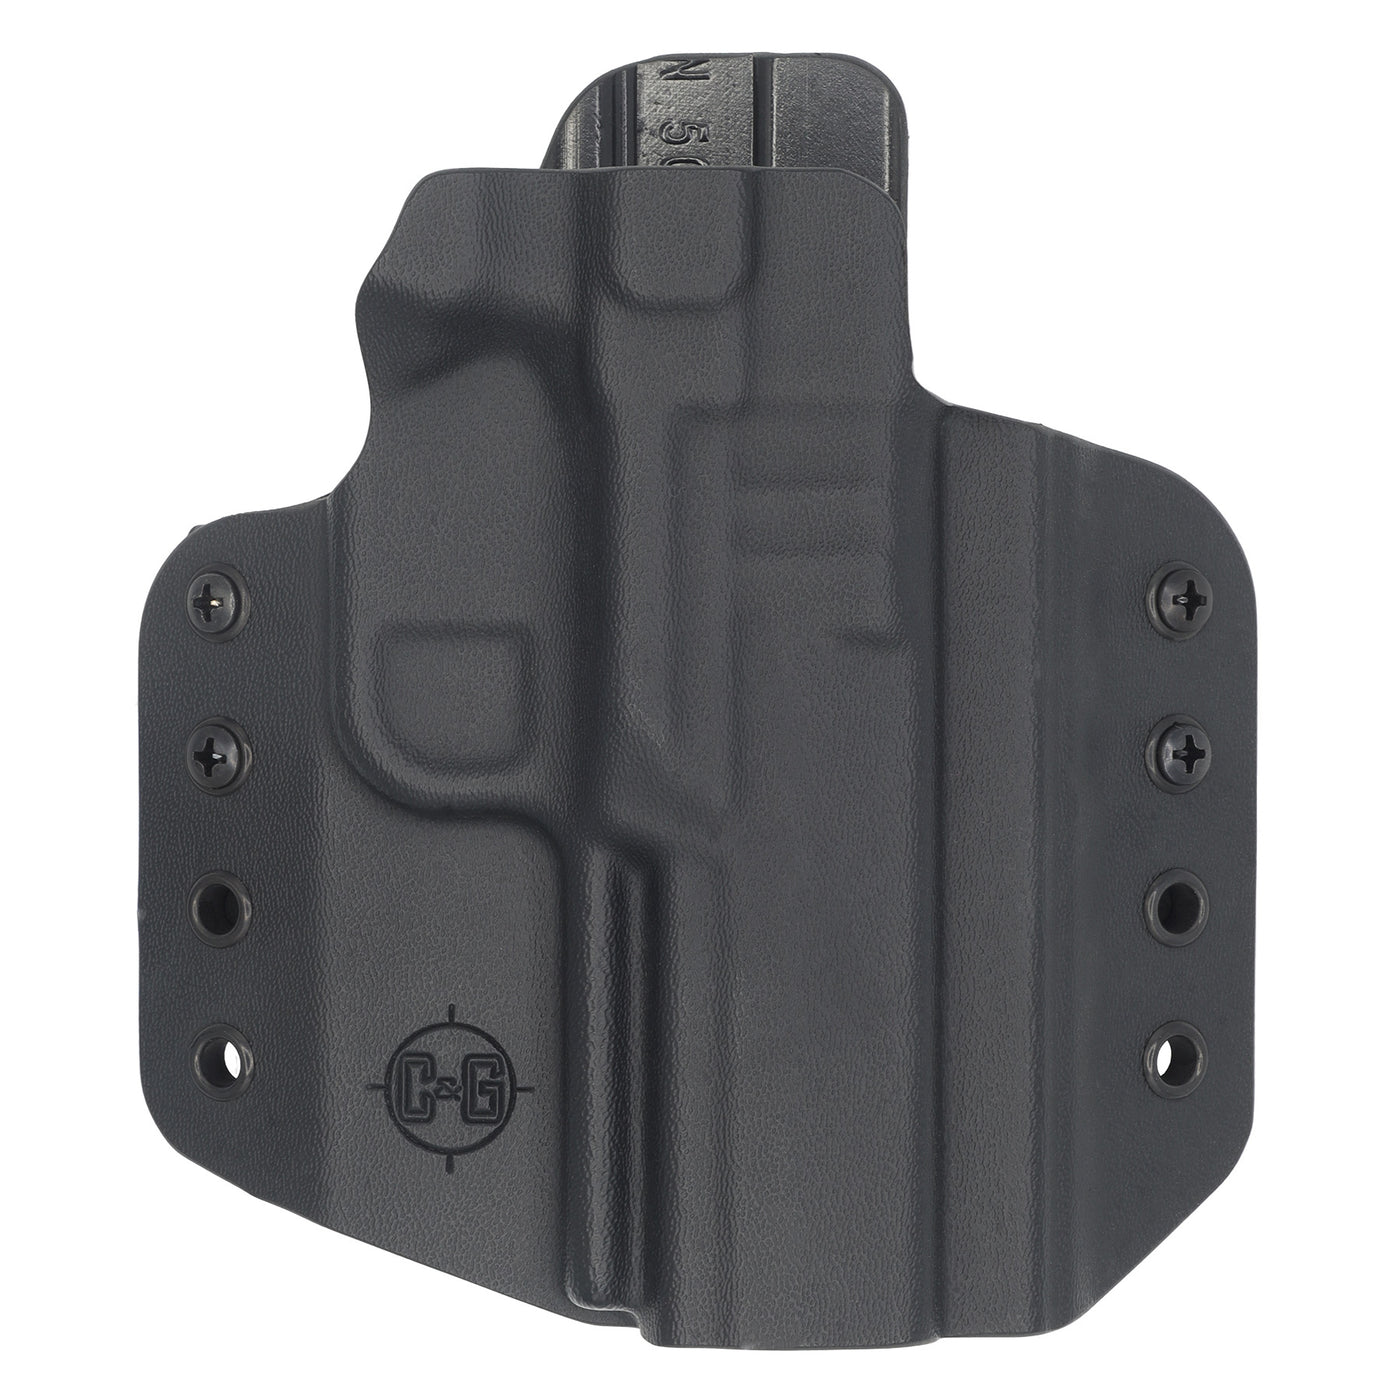 FN 509 OWB Covert Kydex Holster made by C and G Holsters. This is made for an Outside the waist band or OWB